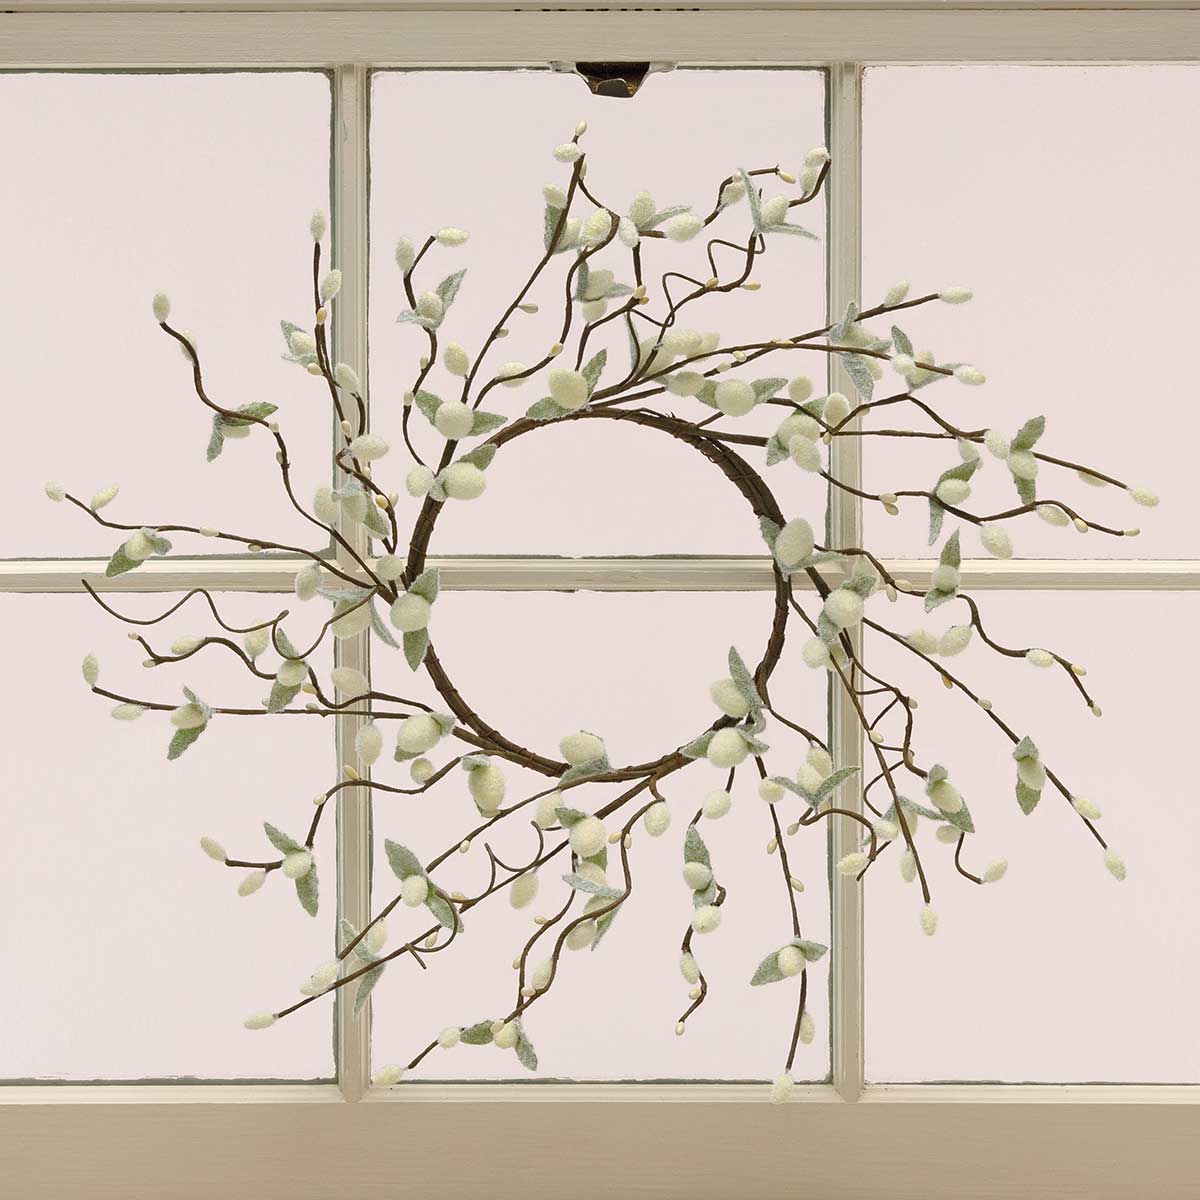 WREATH PUSSY WILLOW 18IN (INNER RING 6.5IN)